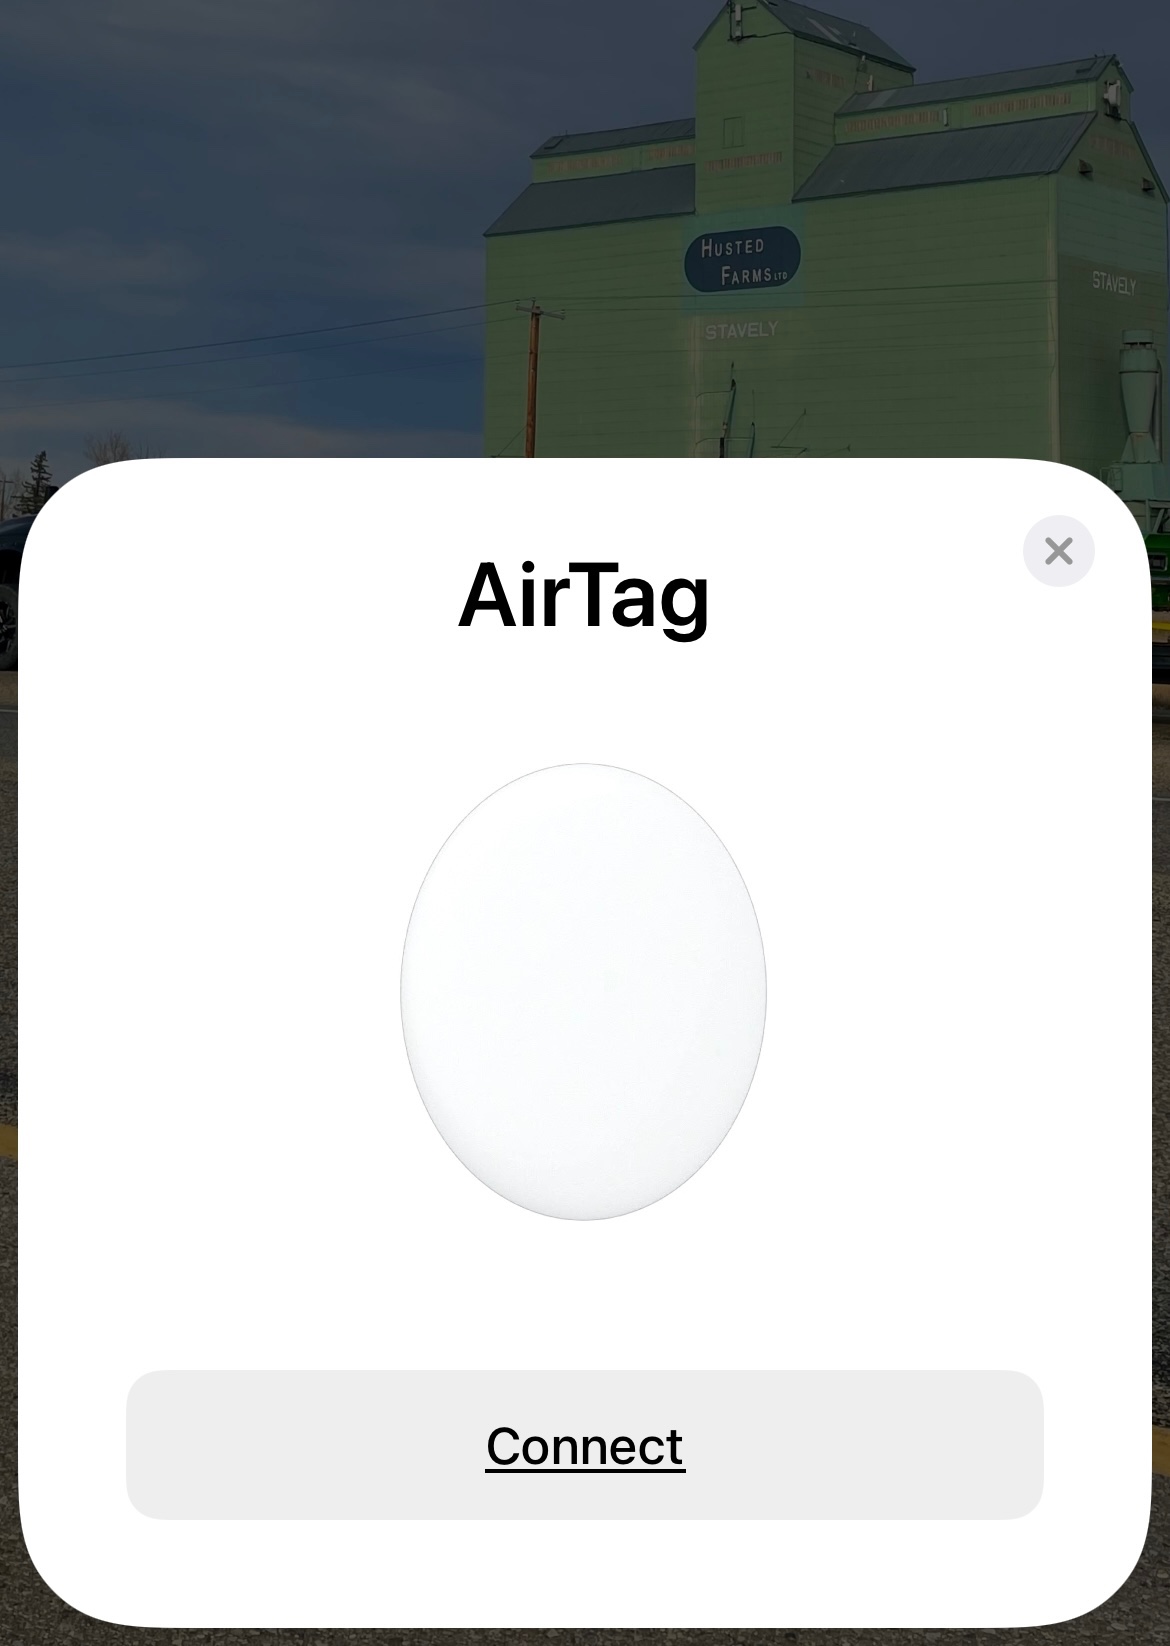 Forget AirTag: AirCard Has Features Apple Can't Match